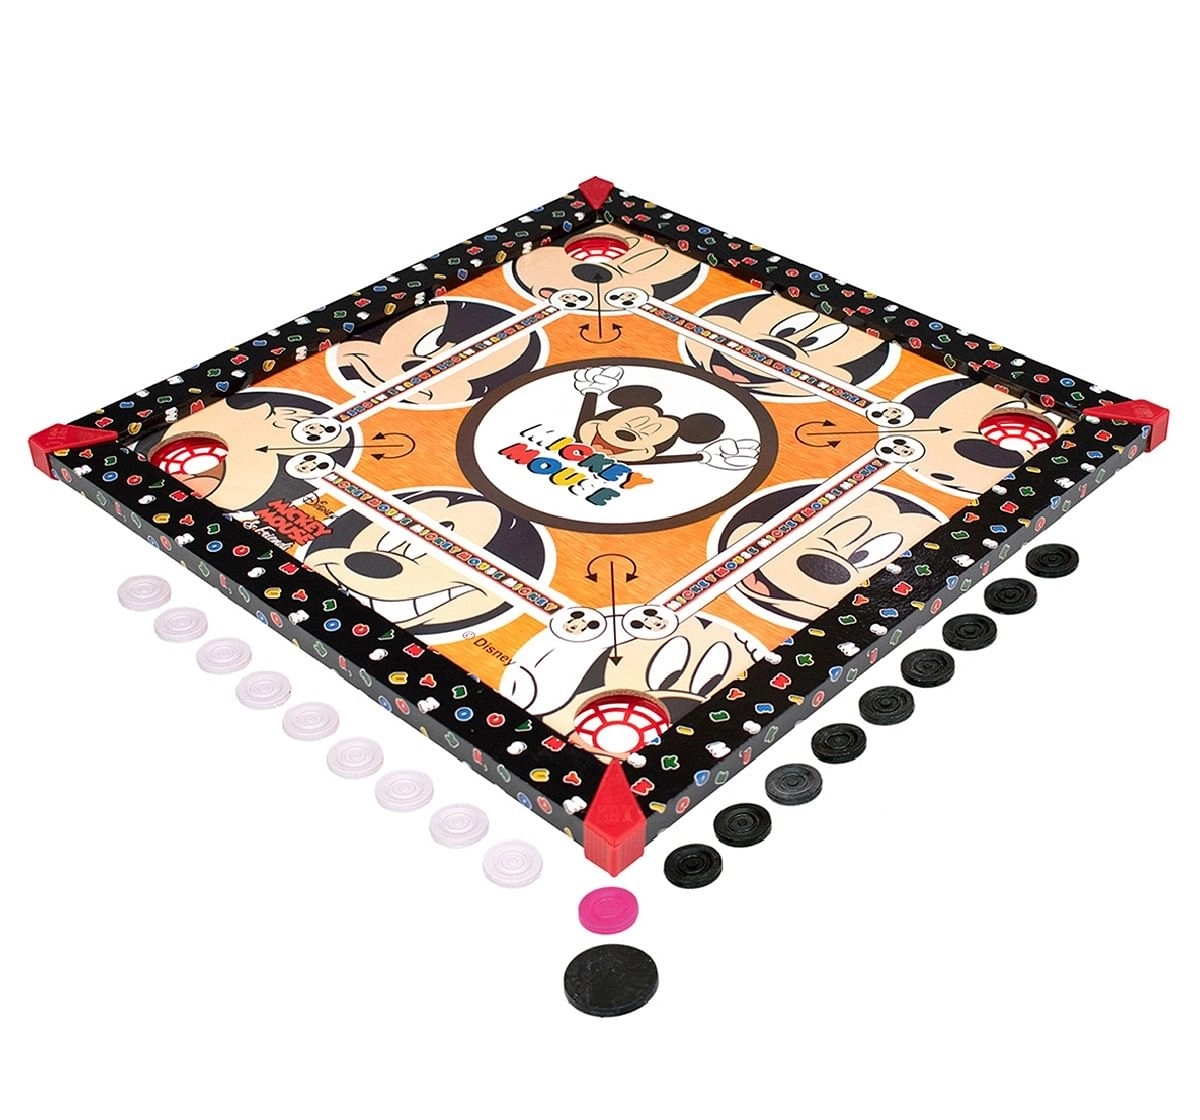 IToys Disney Mickey mouse carrom for kids (20X20), Assorted, Unisex, 4Y+(Multicolour)